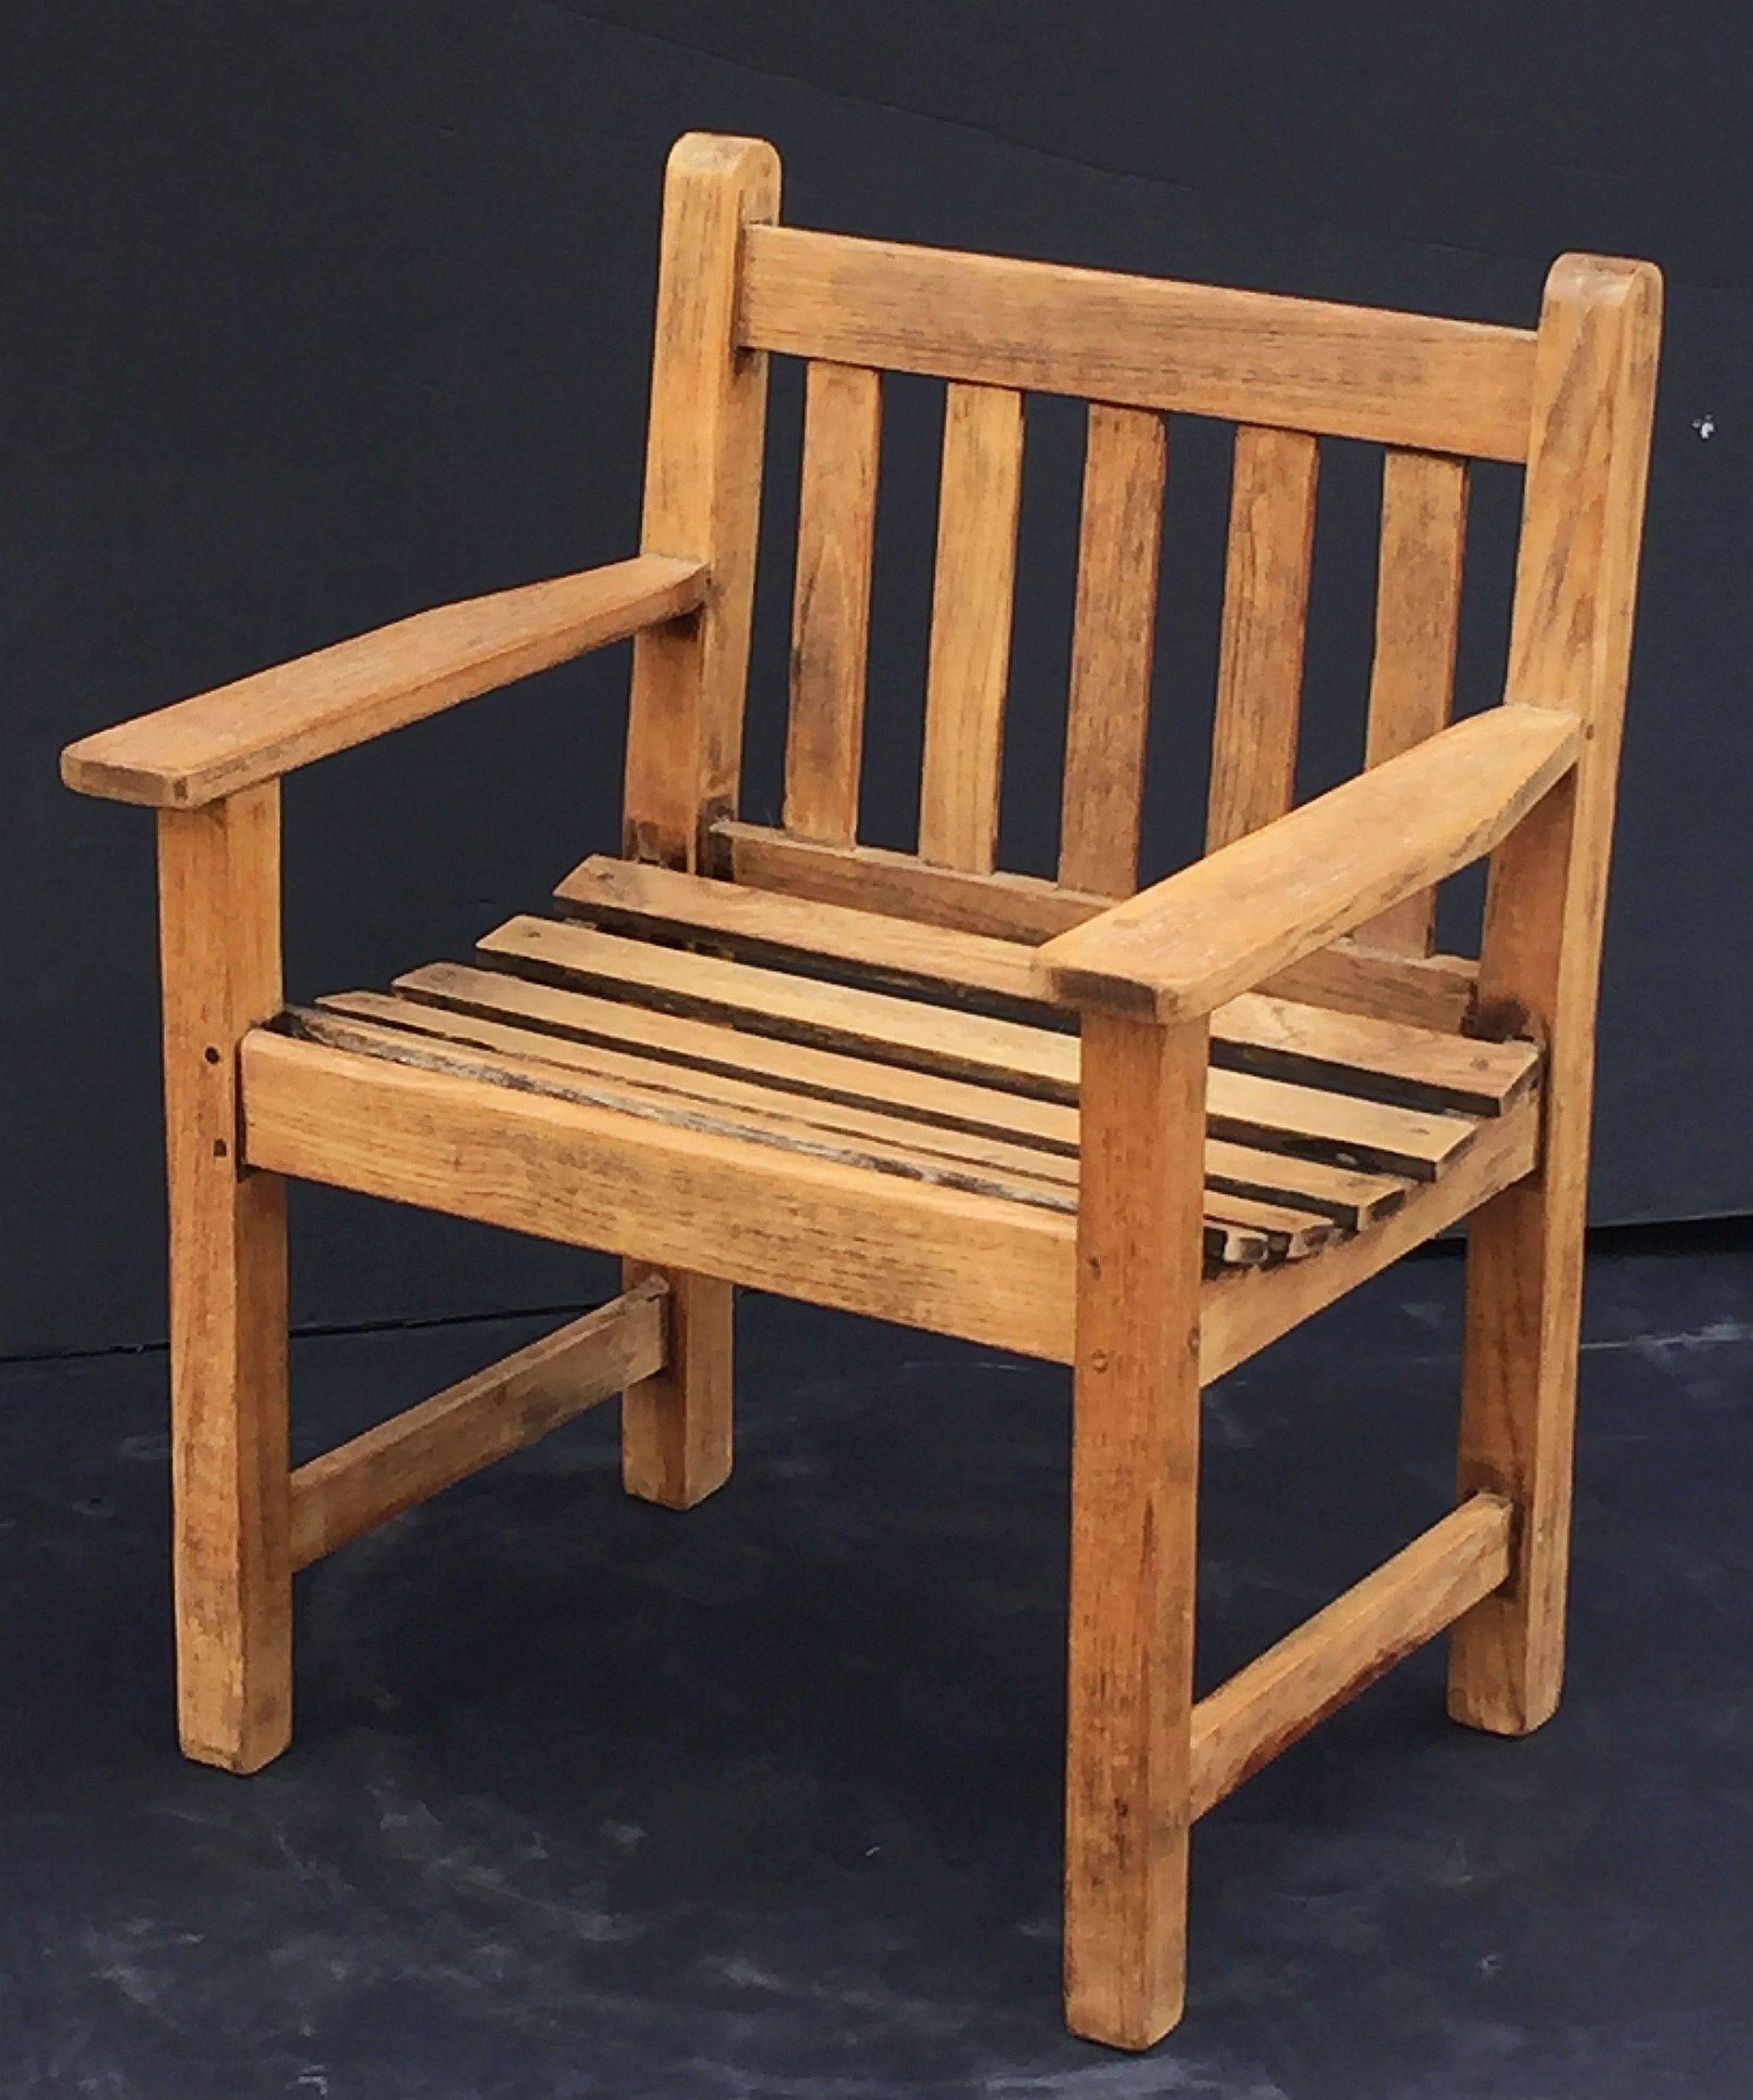 A comfortable English garden or patio chair of fine, aged teak wood, featuring a slat back and seat and a stylish frame.

By the early 1900s, R.A. Lister developed a successful line of wood-based garden furniture.

This chair has a tab that